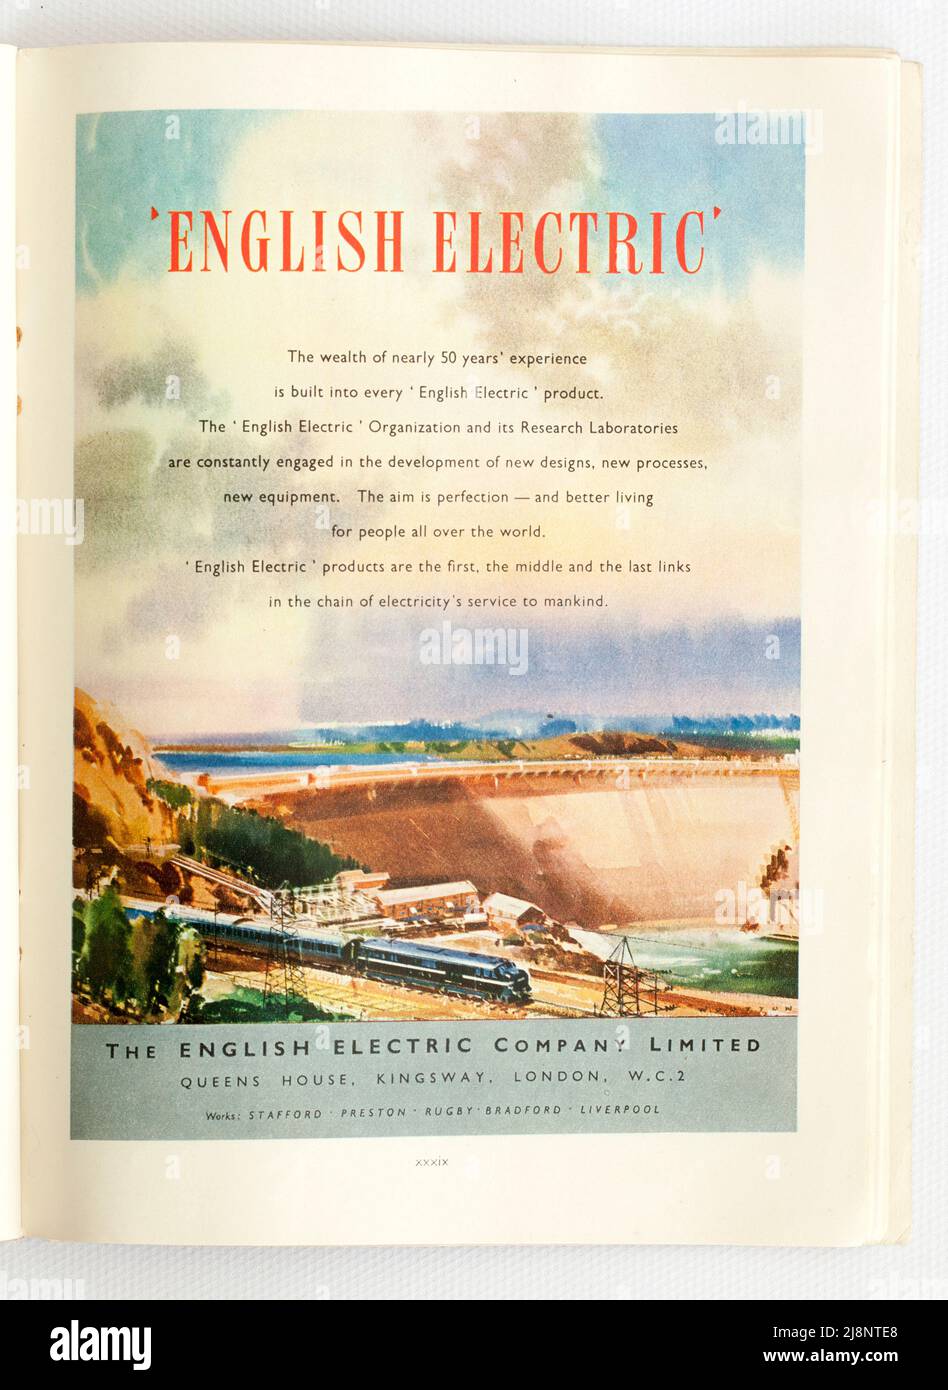 Old 1950s British Advertising for The English Electric Company Stock Photo